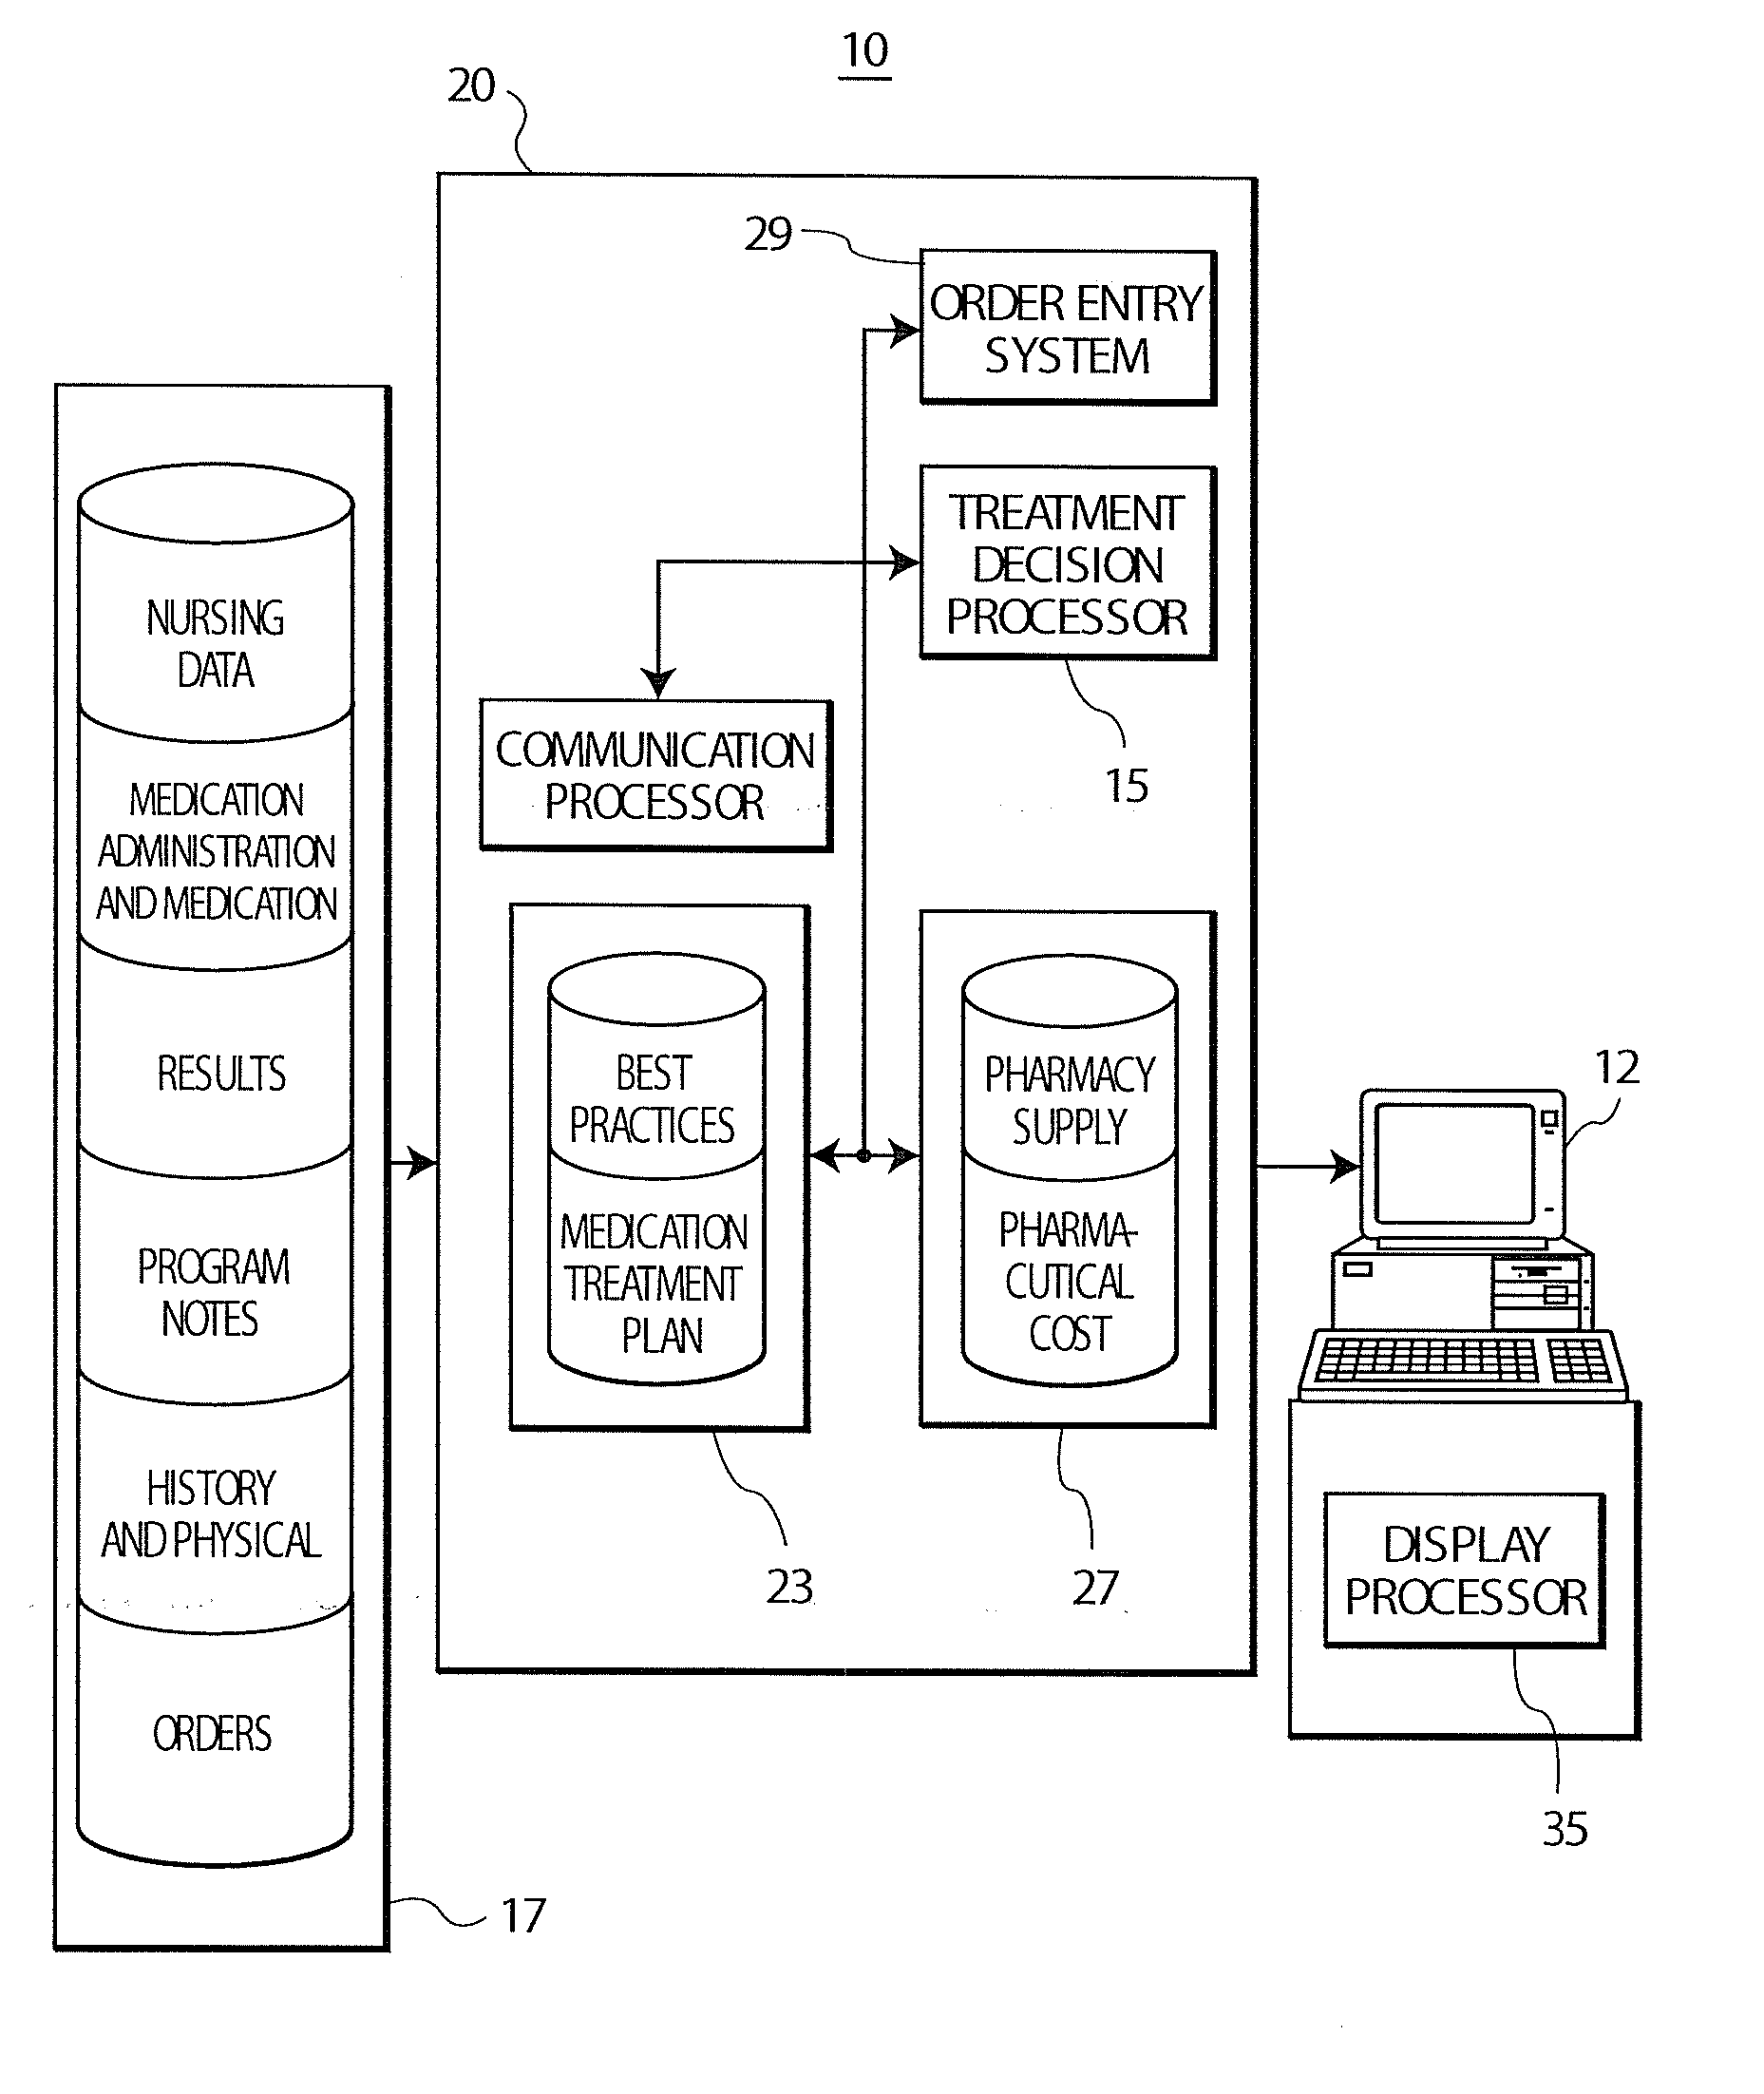 Treatment Decision Support System and User Interface